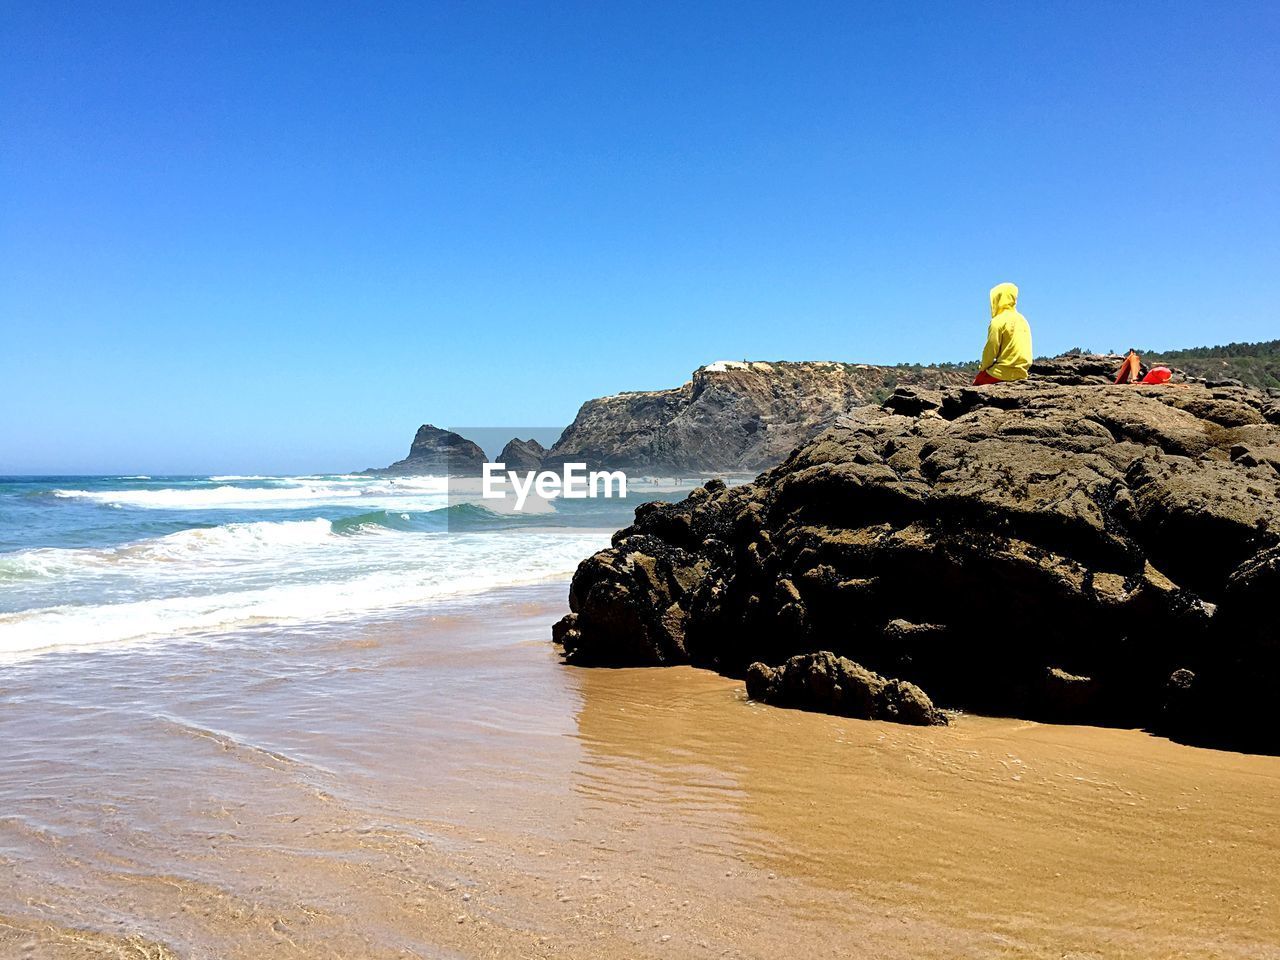 Person sitting on rock at beach against clear blue sky